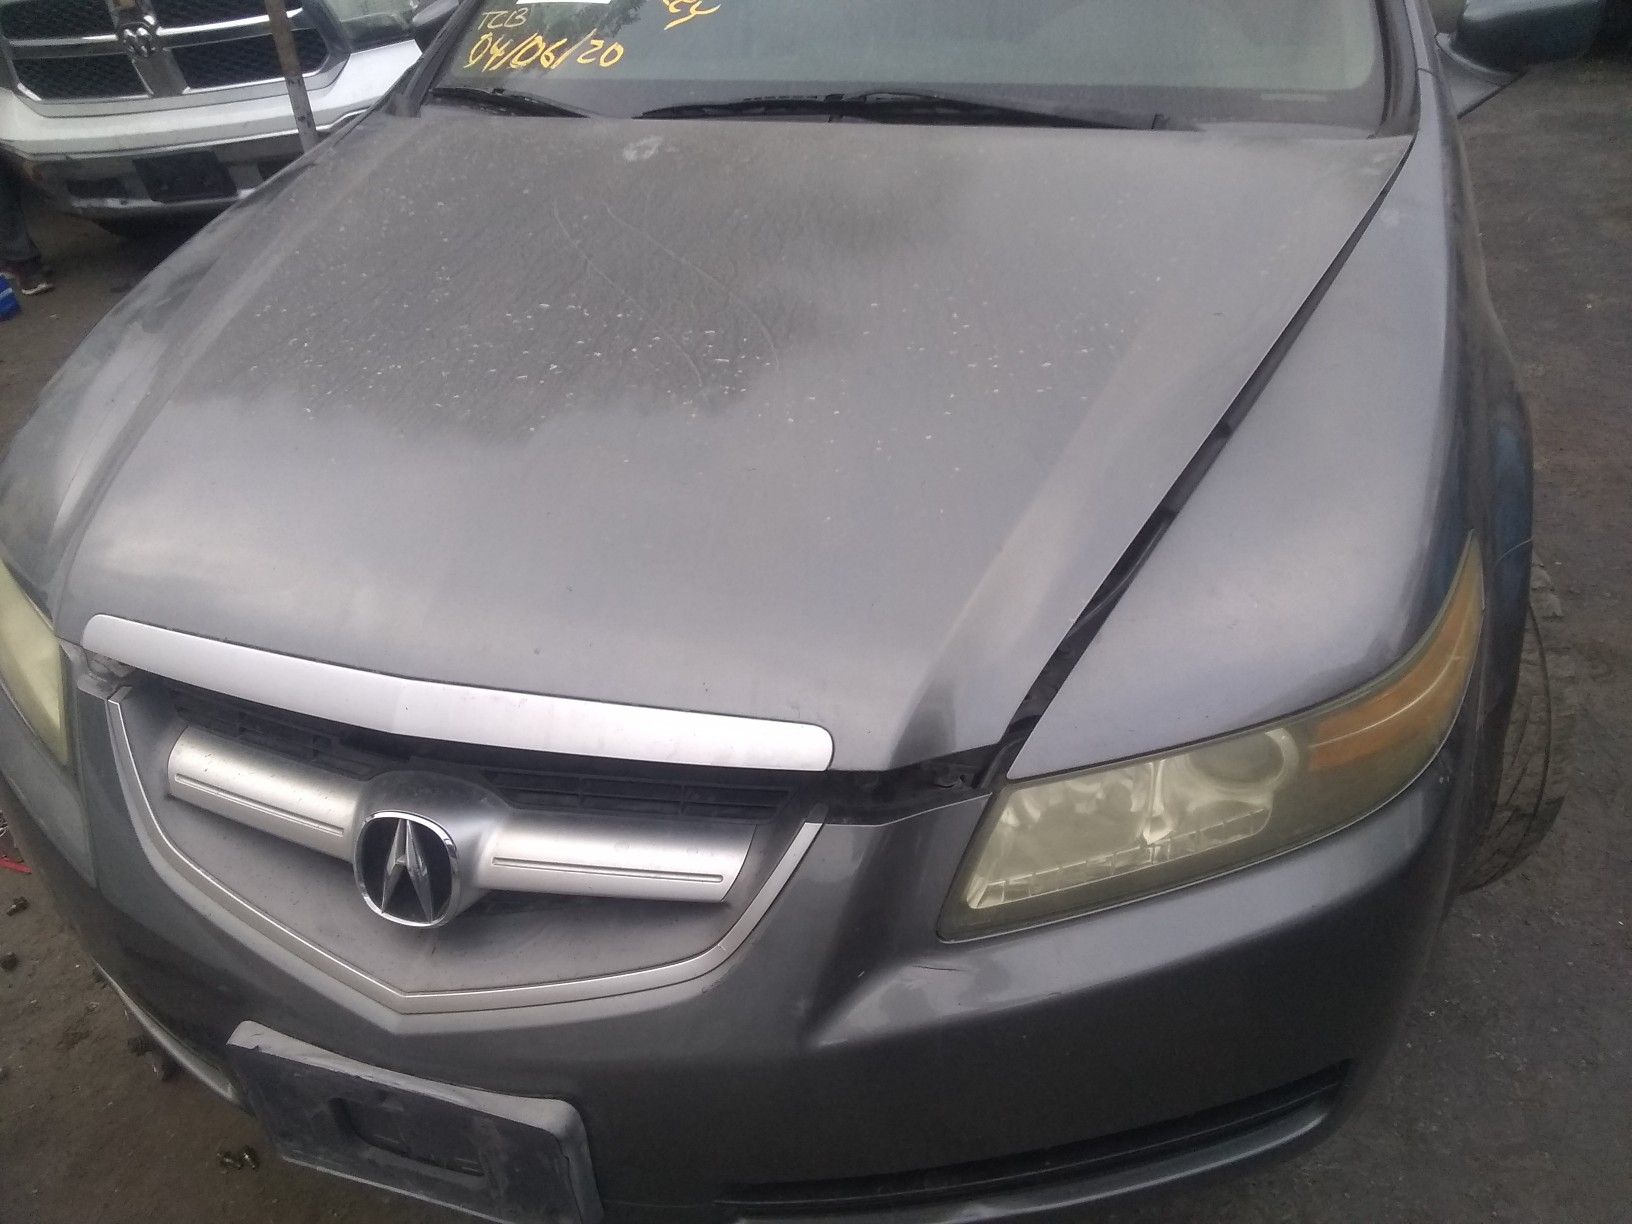 2004 -2008 Acura TL parts , parting out